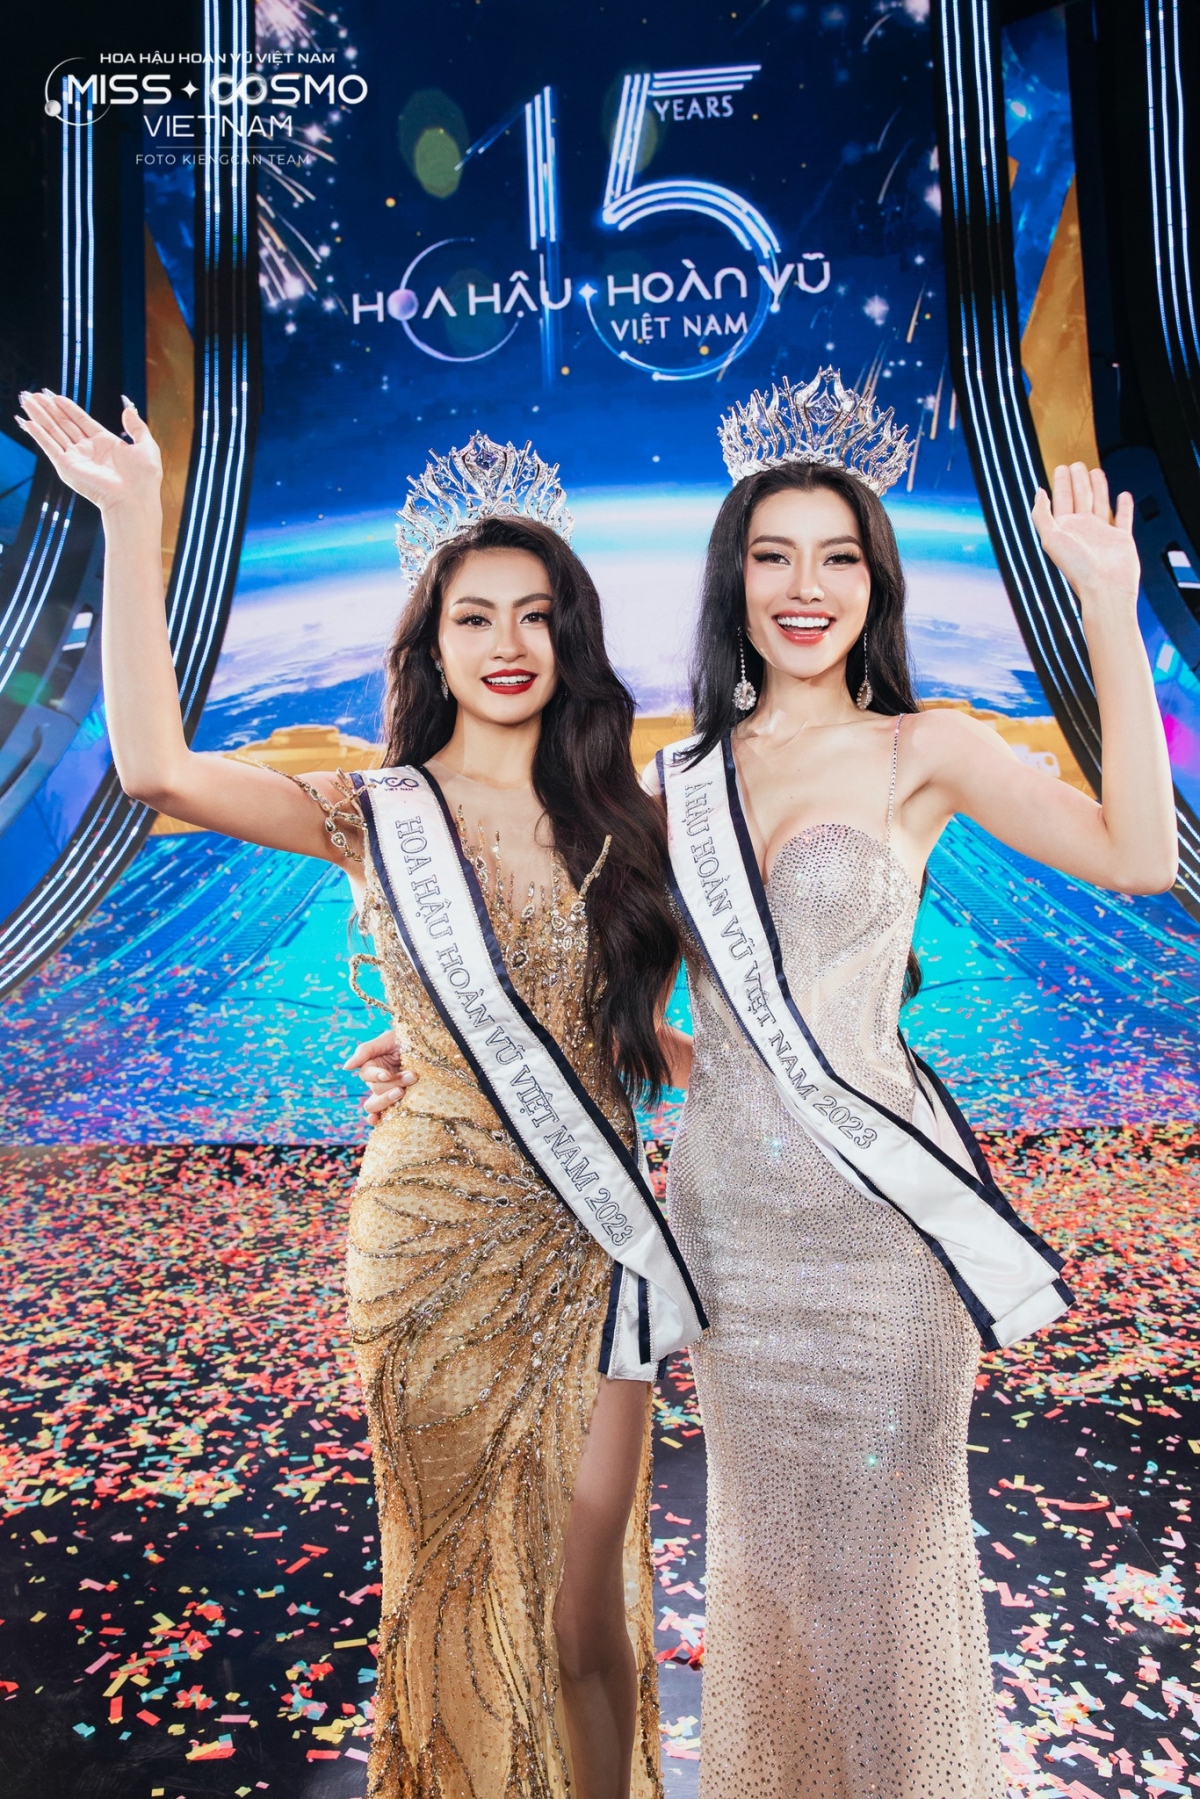 ninh binh native crowned miss cosmo vietnam 2023 picture 6